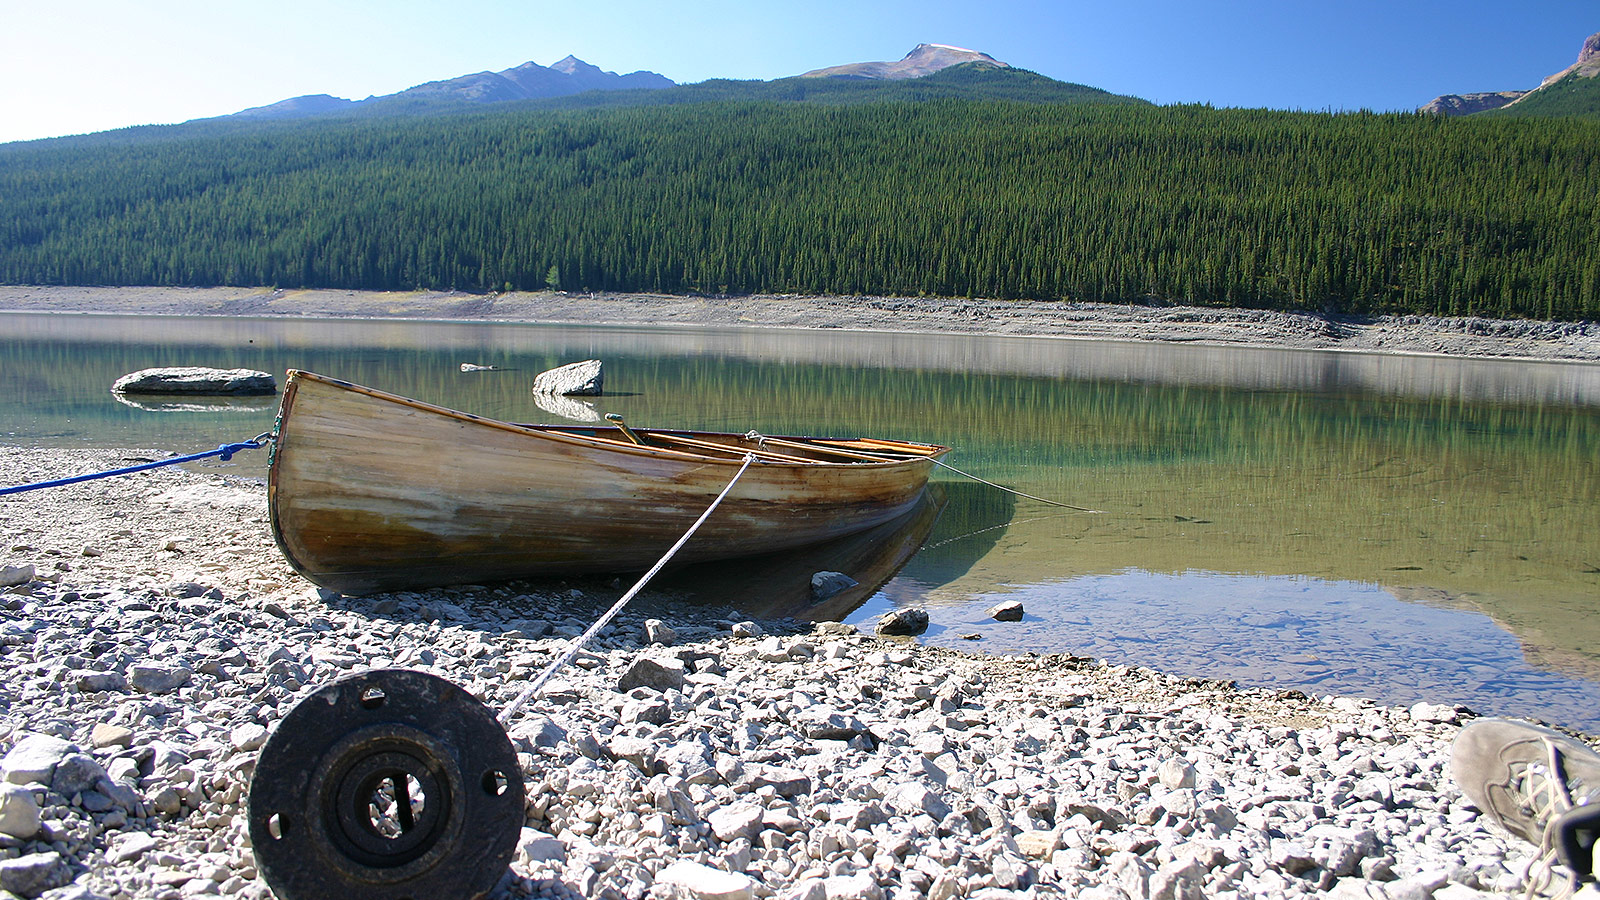 A wooden canoe anchored by a metal pipe sits in a crystal clear lake with forest and mountains in the background - Bucket list destinations in Canada